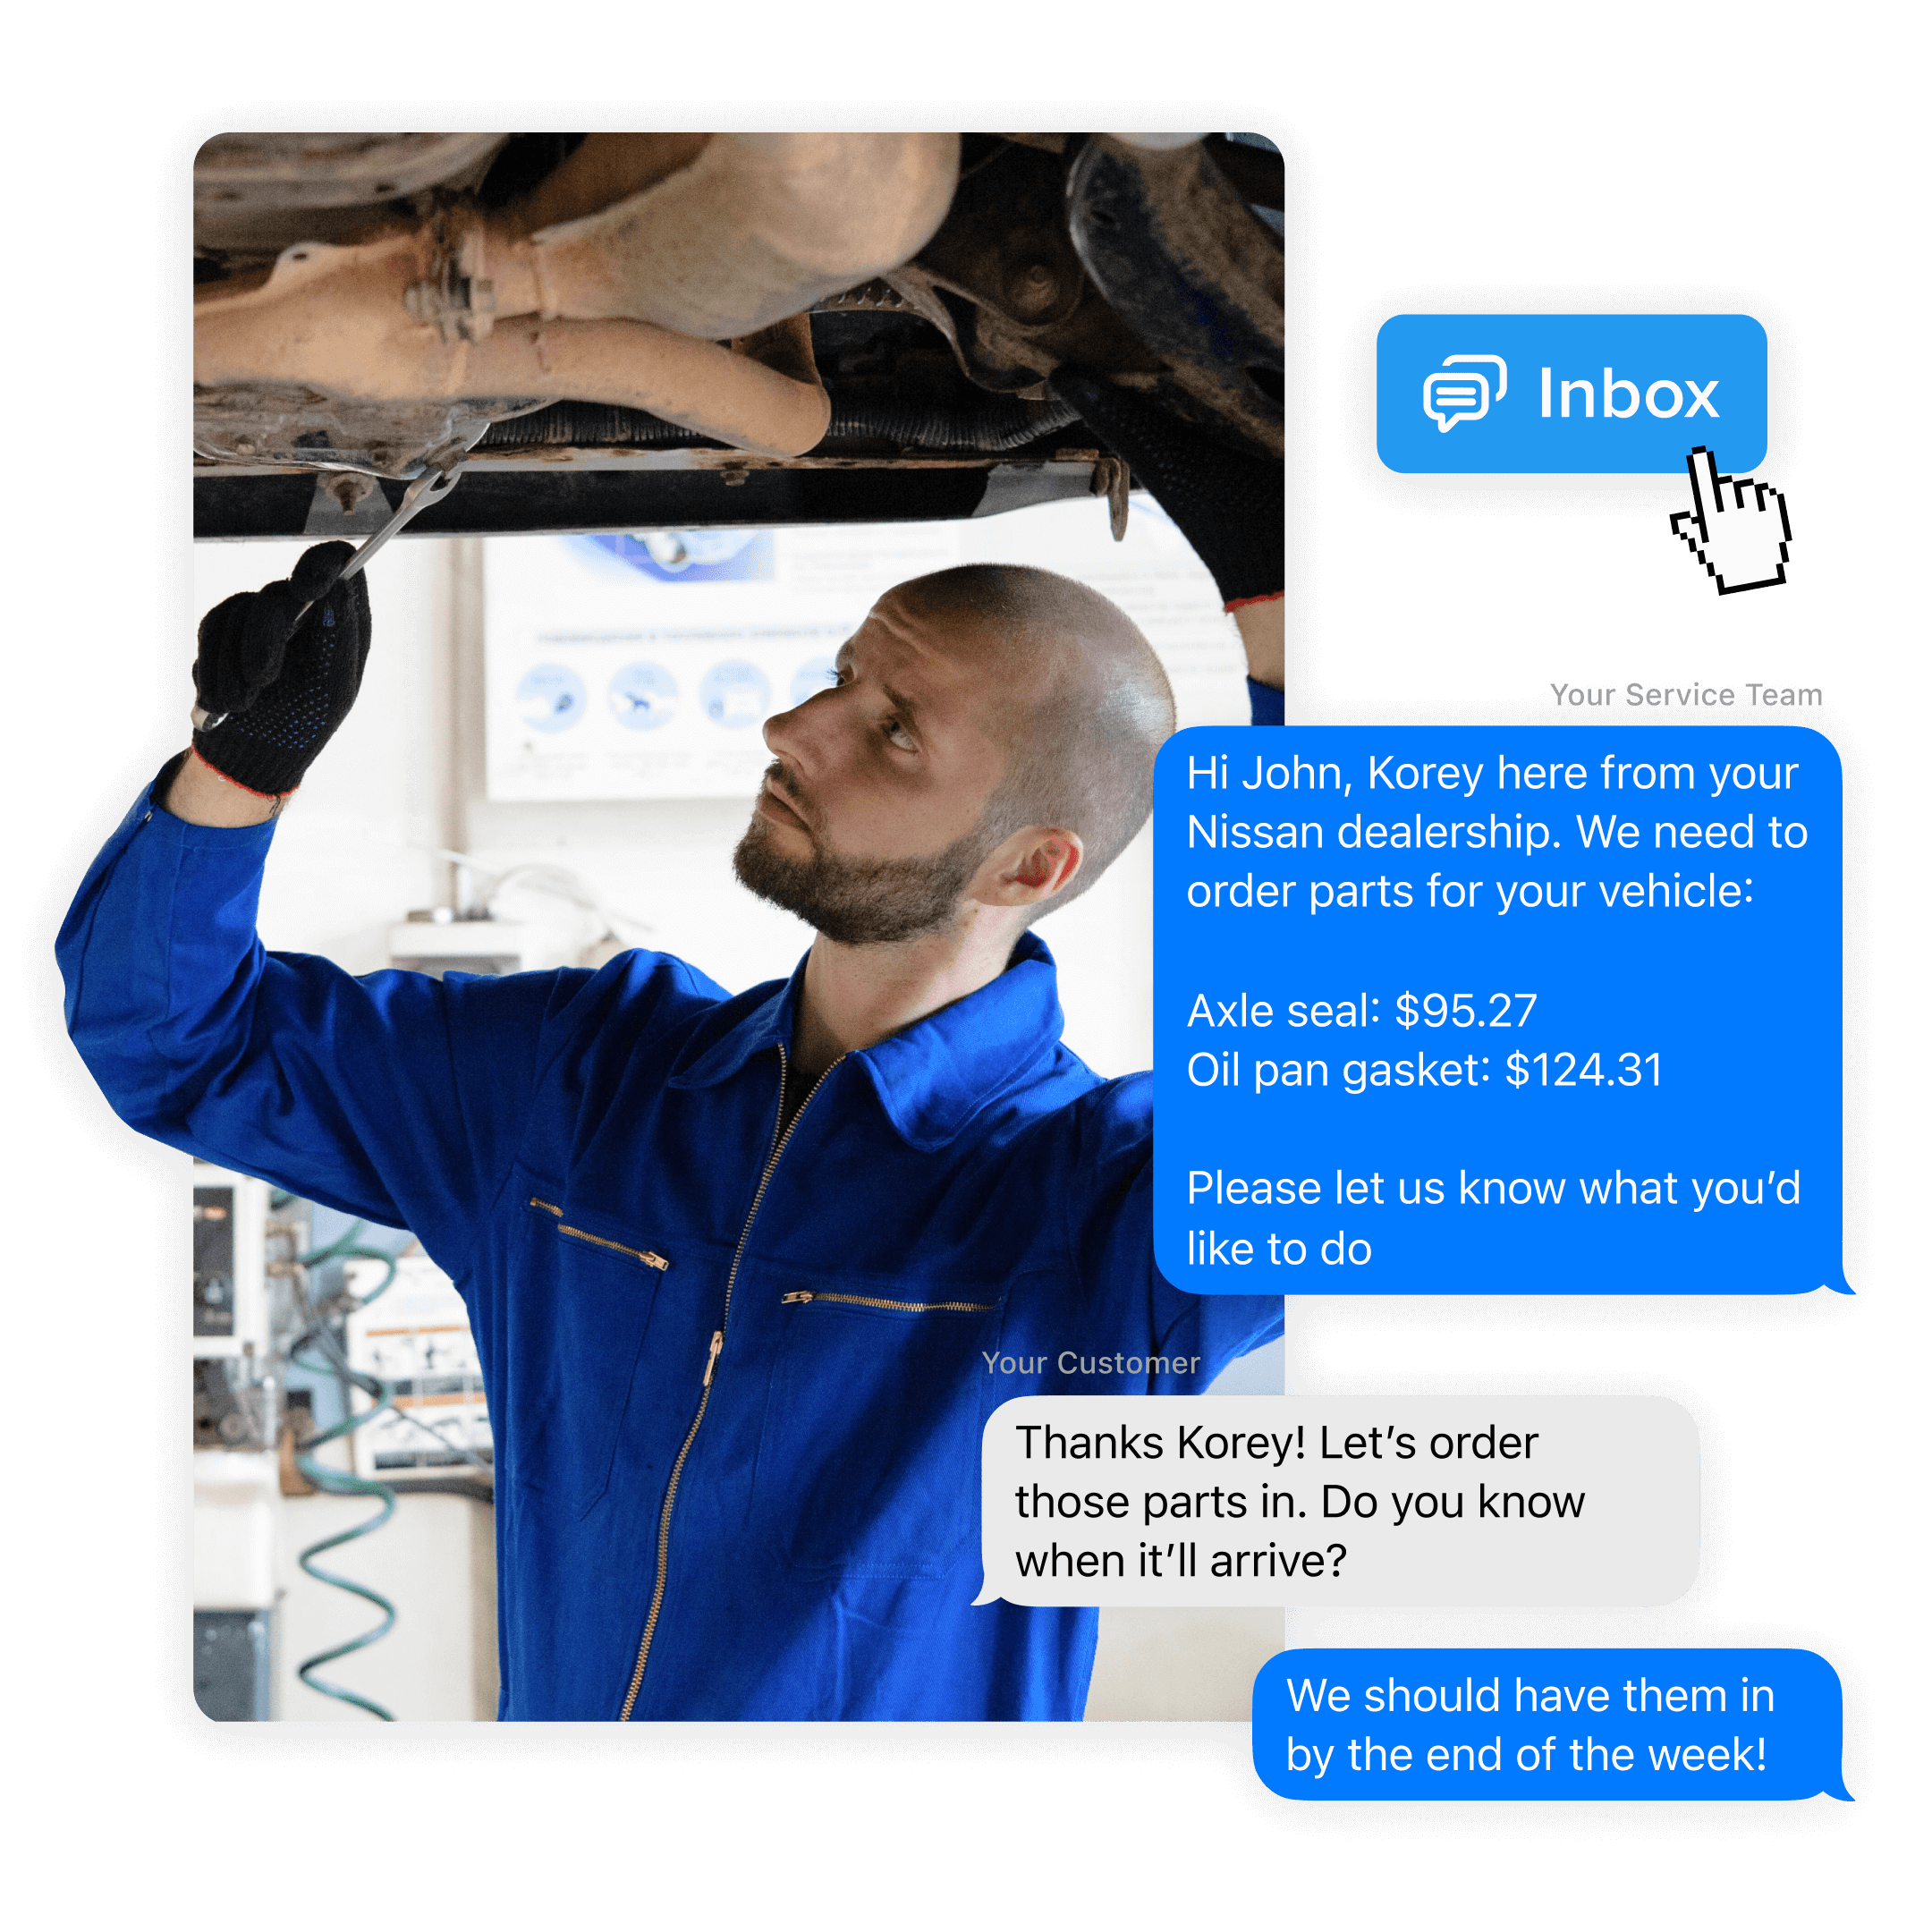 A mechanic, working under a vehicle, checks his phone. The screen displays a conversation with a Nissan dealership about ordering vehicle parts, with an affirmative reply from the customer.